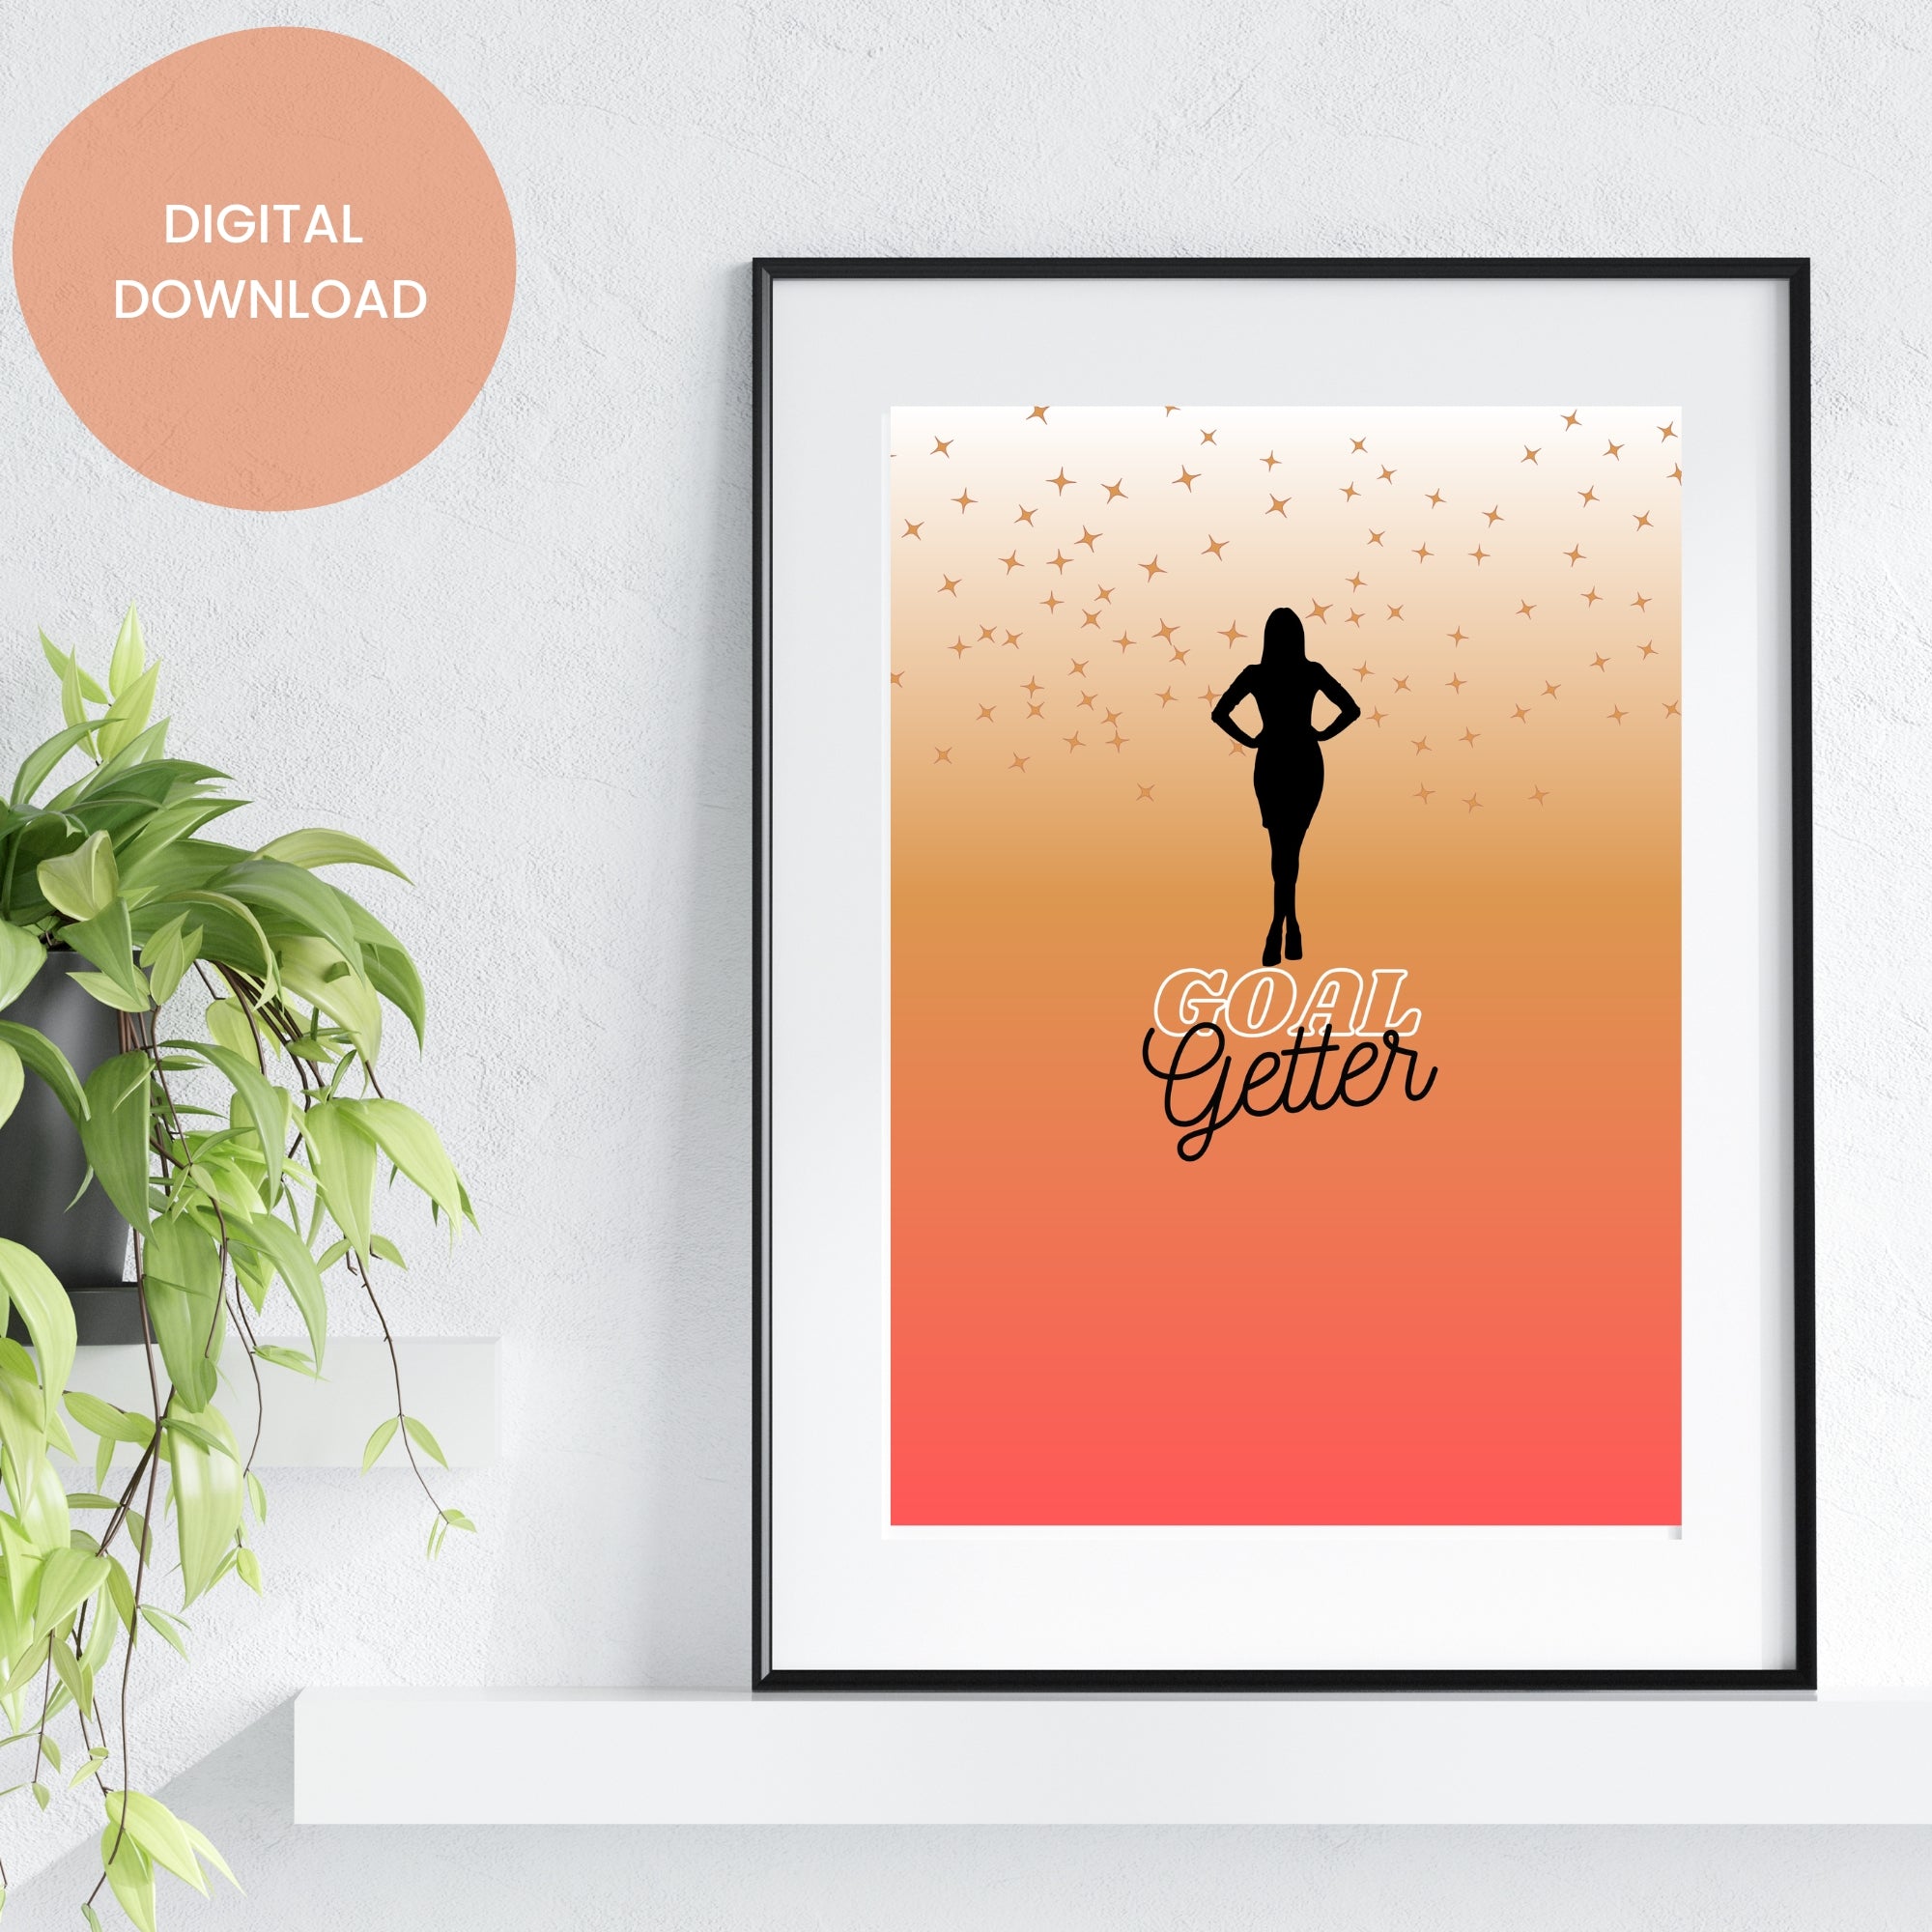 Inspirational Woman's Wall Art Pack: 6 Posters